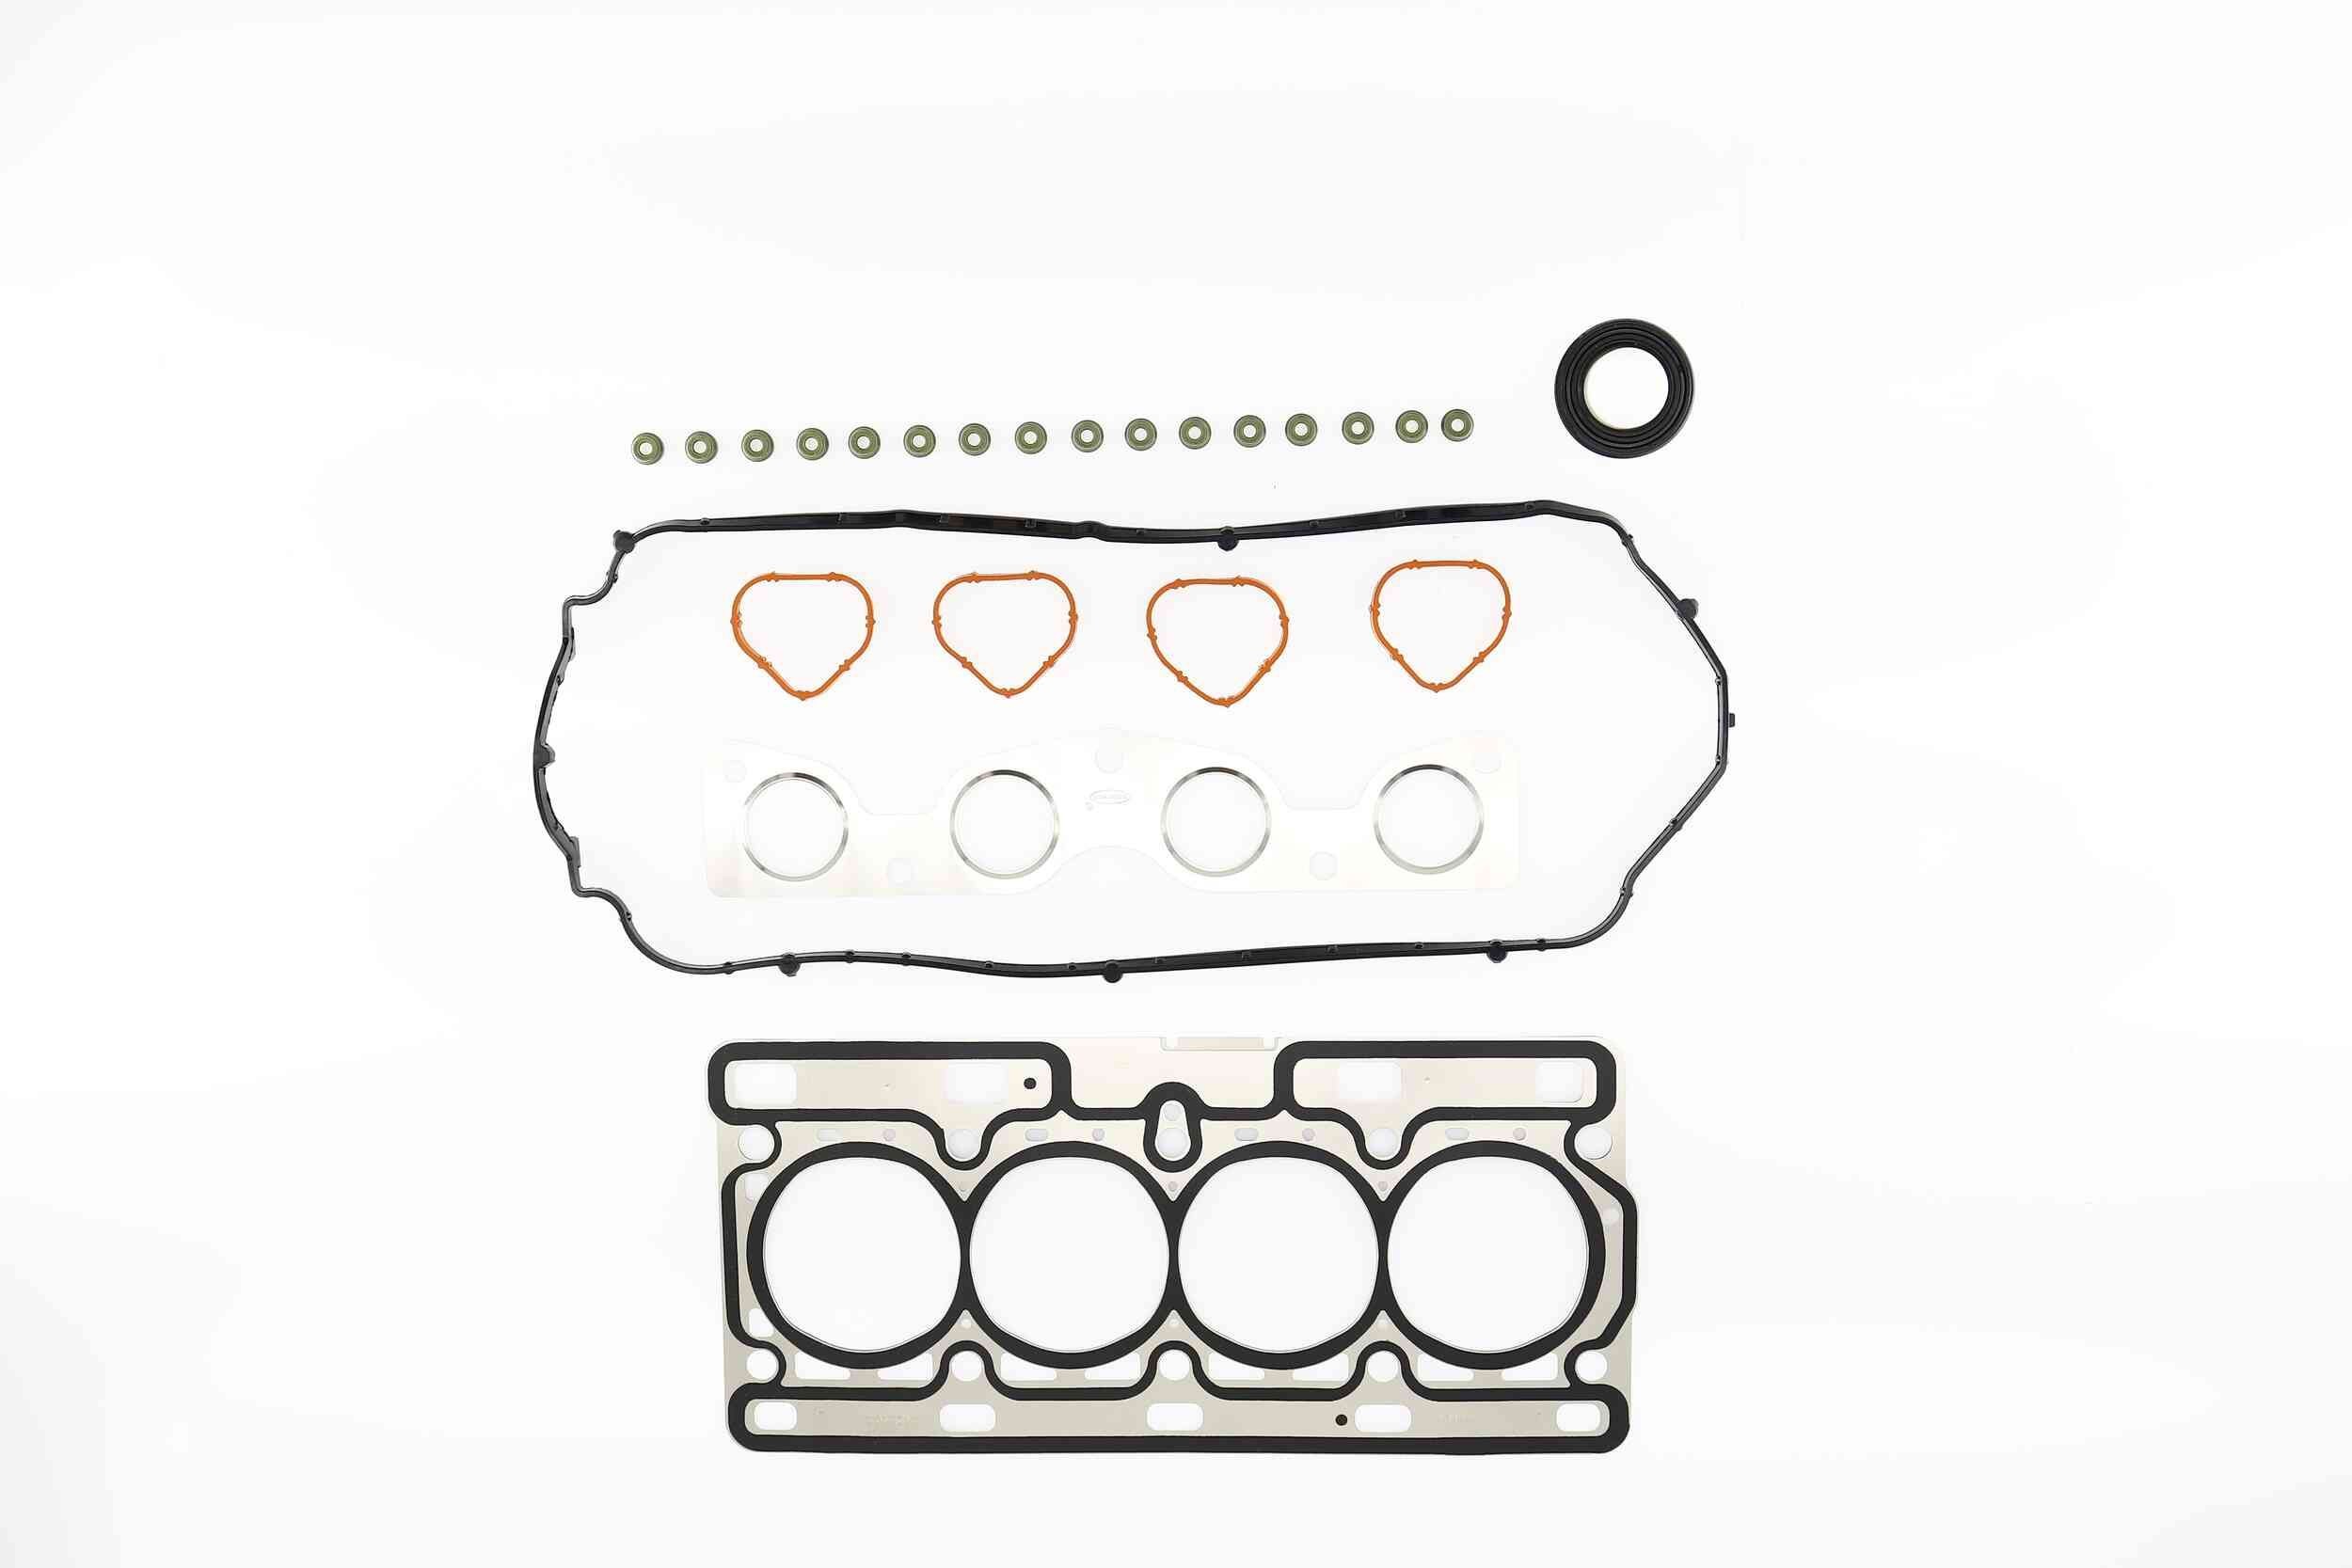 83417739 CORTECO with camshaft seal, with cylinder head gasket, with valve stem seals Head gasket kit 417739P buy